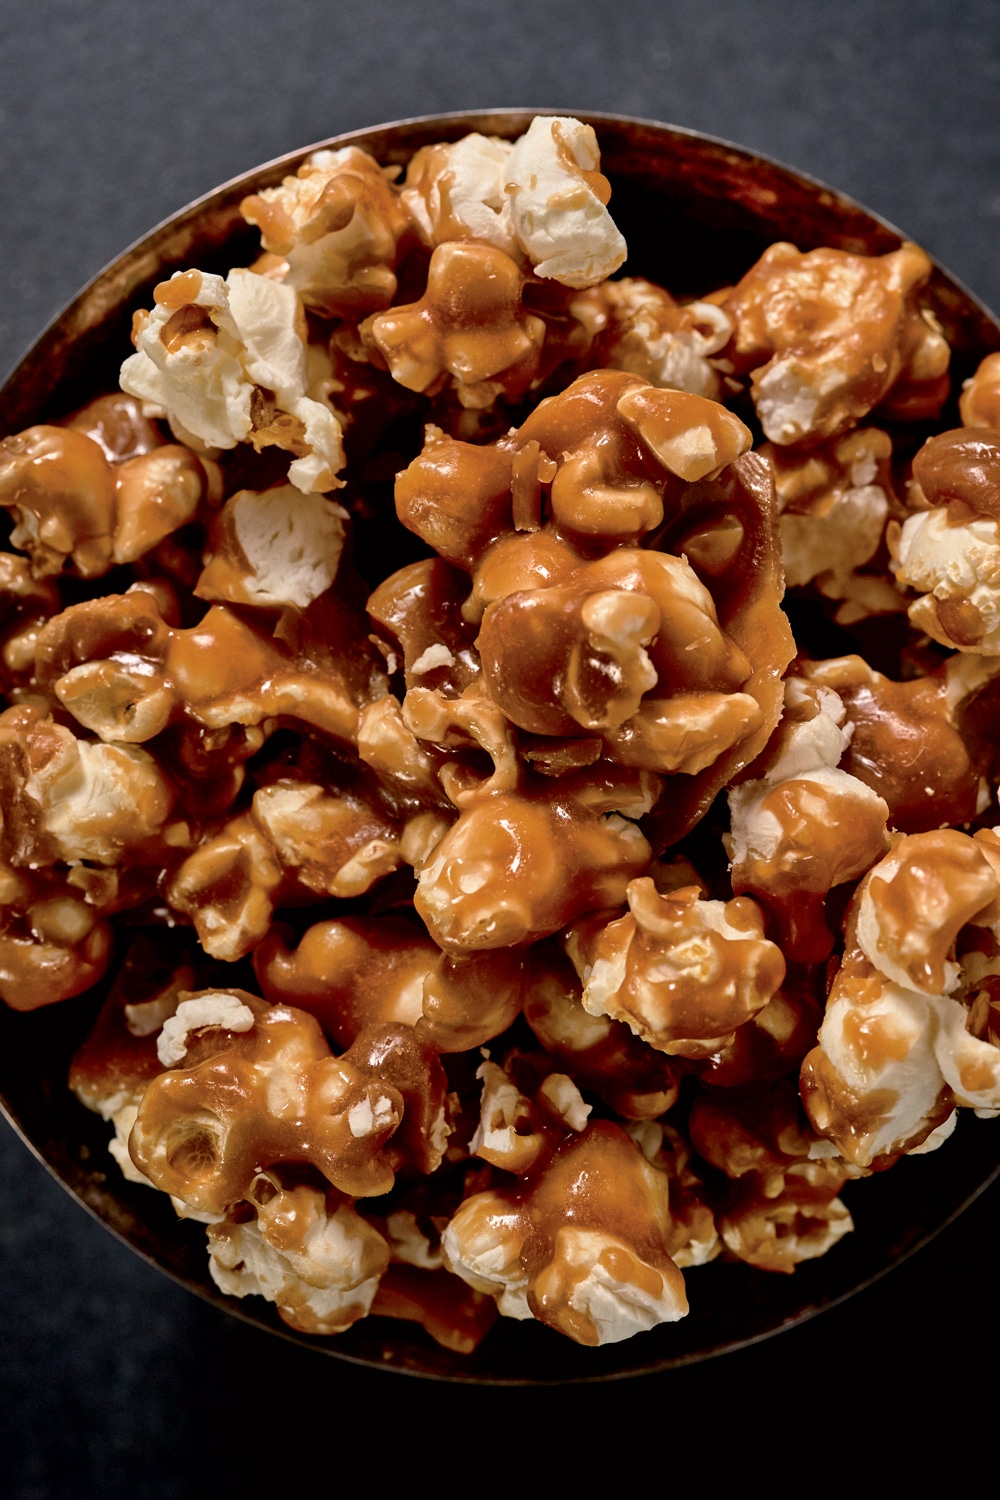 Maple Toffee Popcorn with Salted Peanuts Recipe